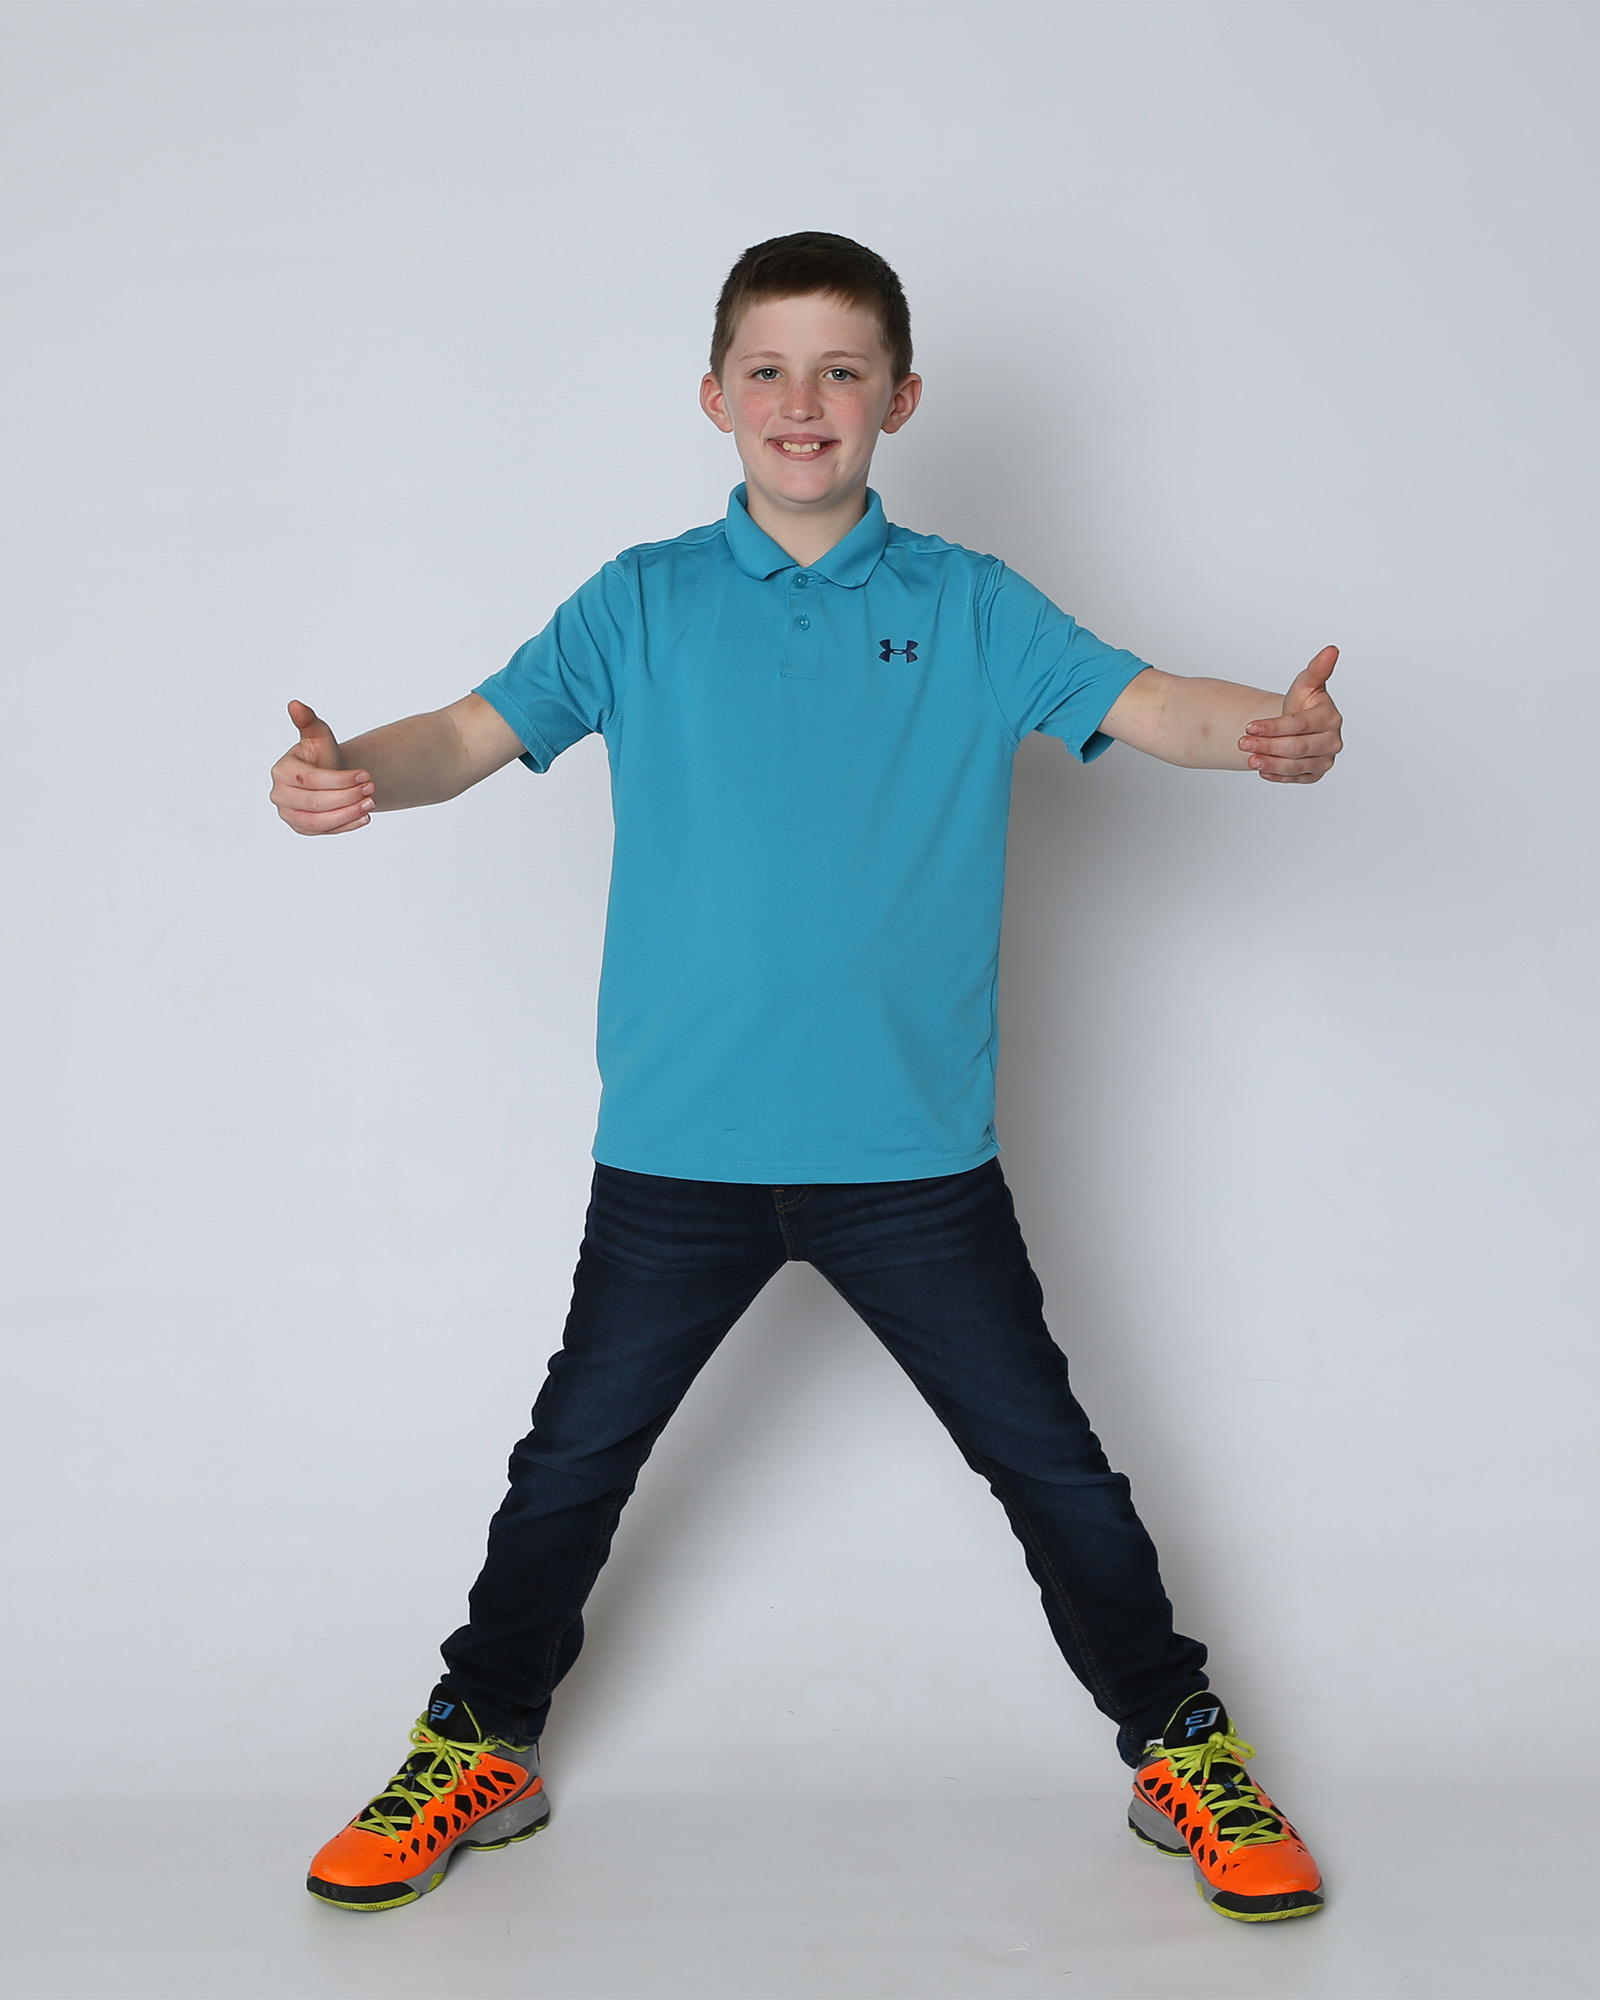 Child-Jeans-Sneakers-Polo Shirt-Blue-Orange